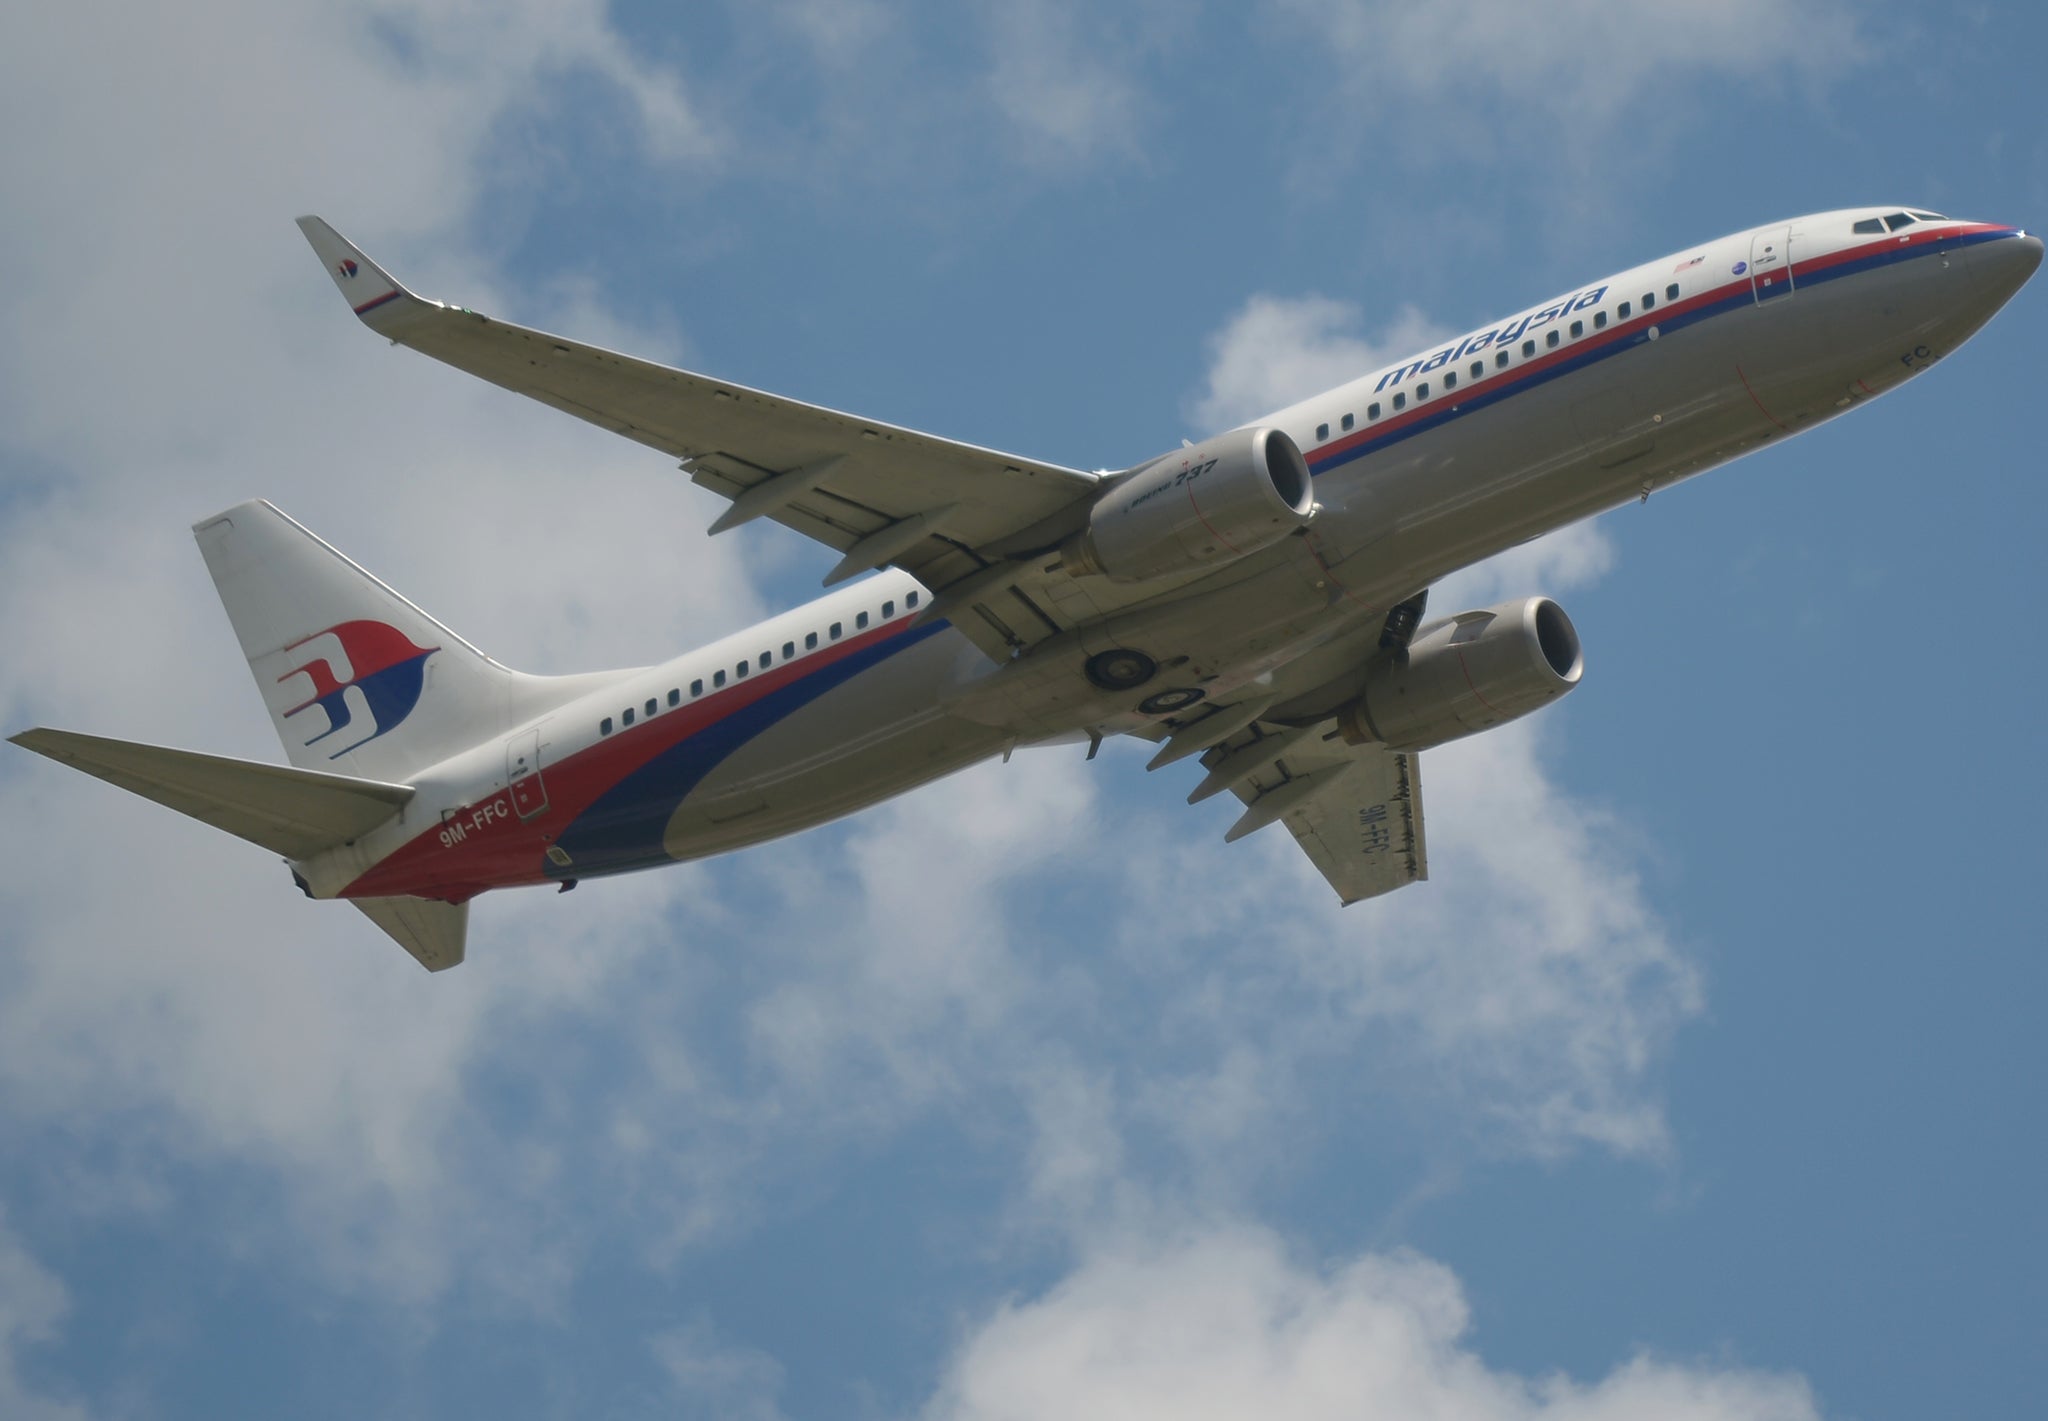 Malaysia Airlines has suffered heavy financial losses after two disasters